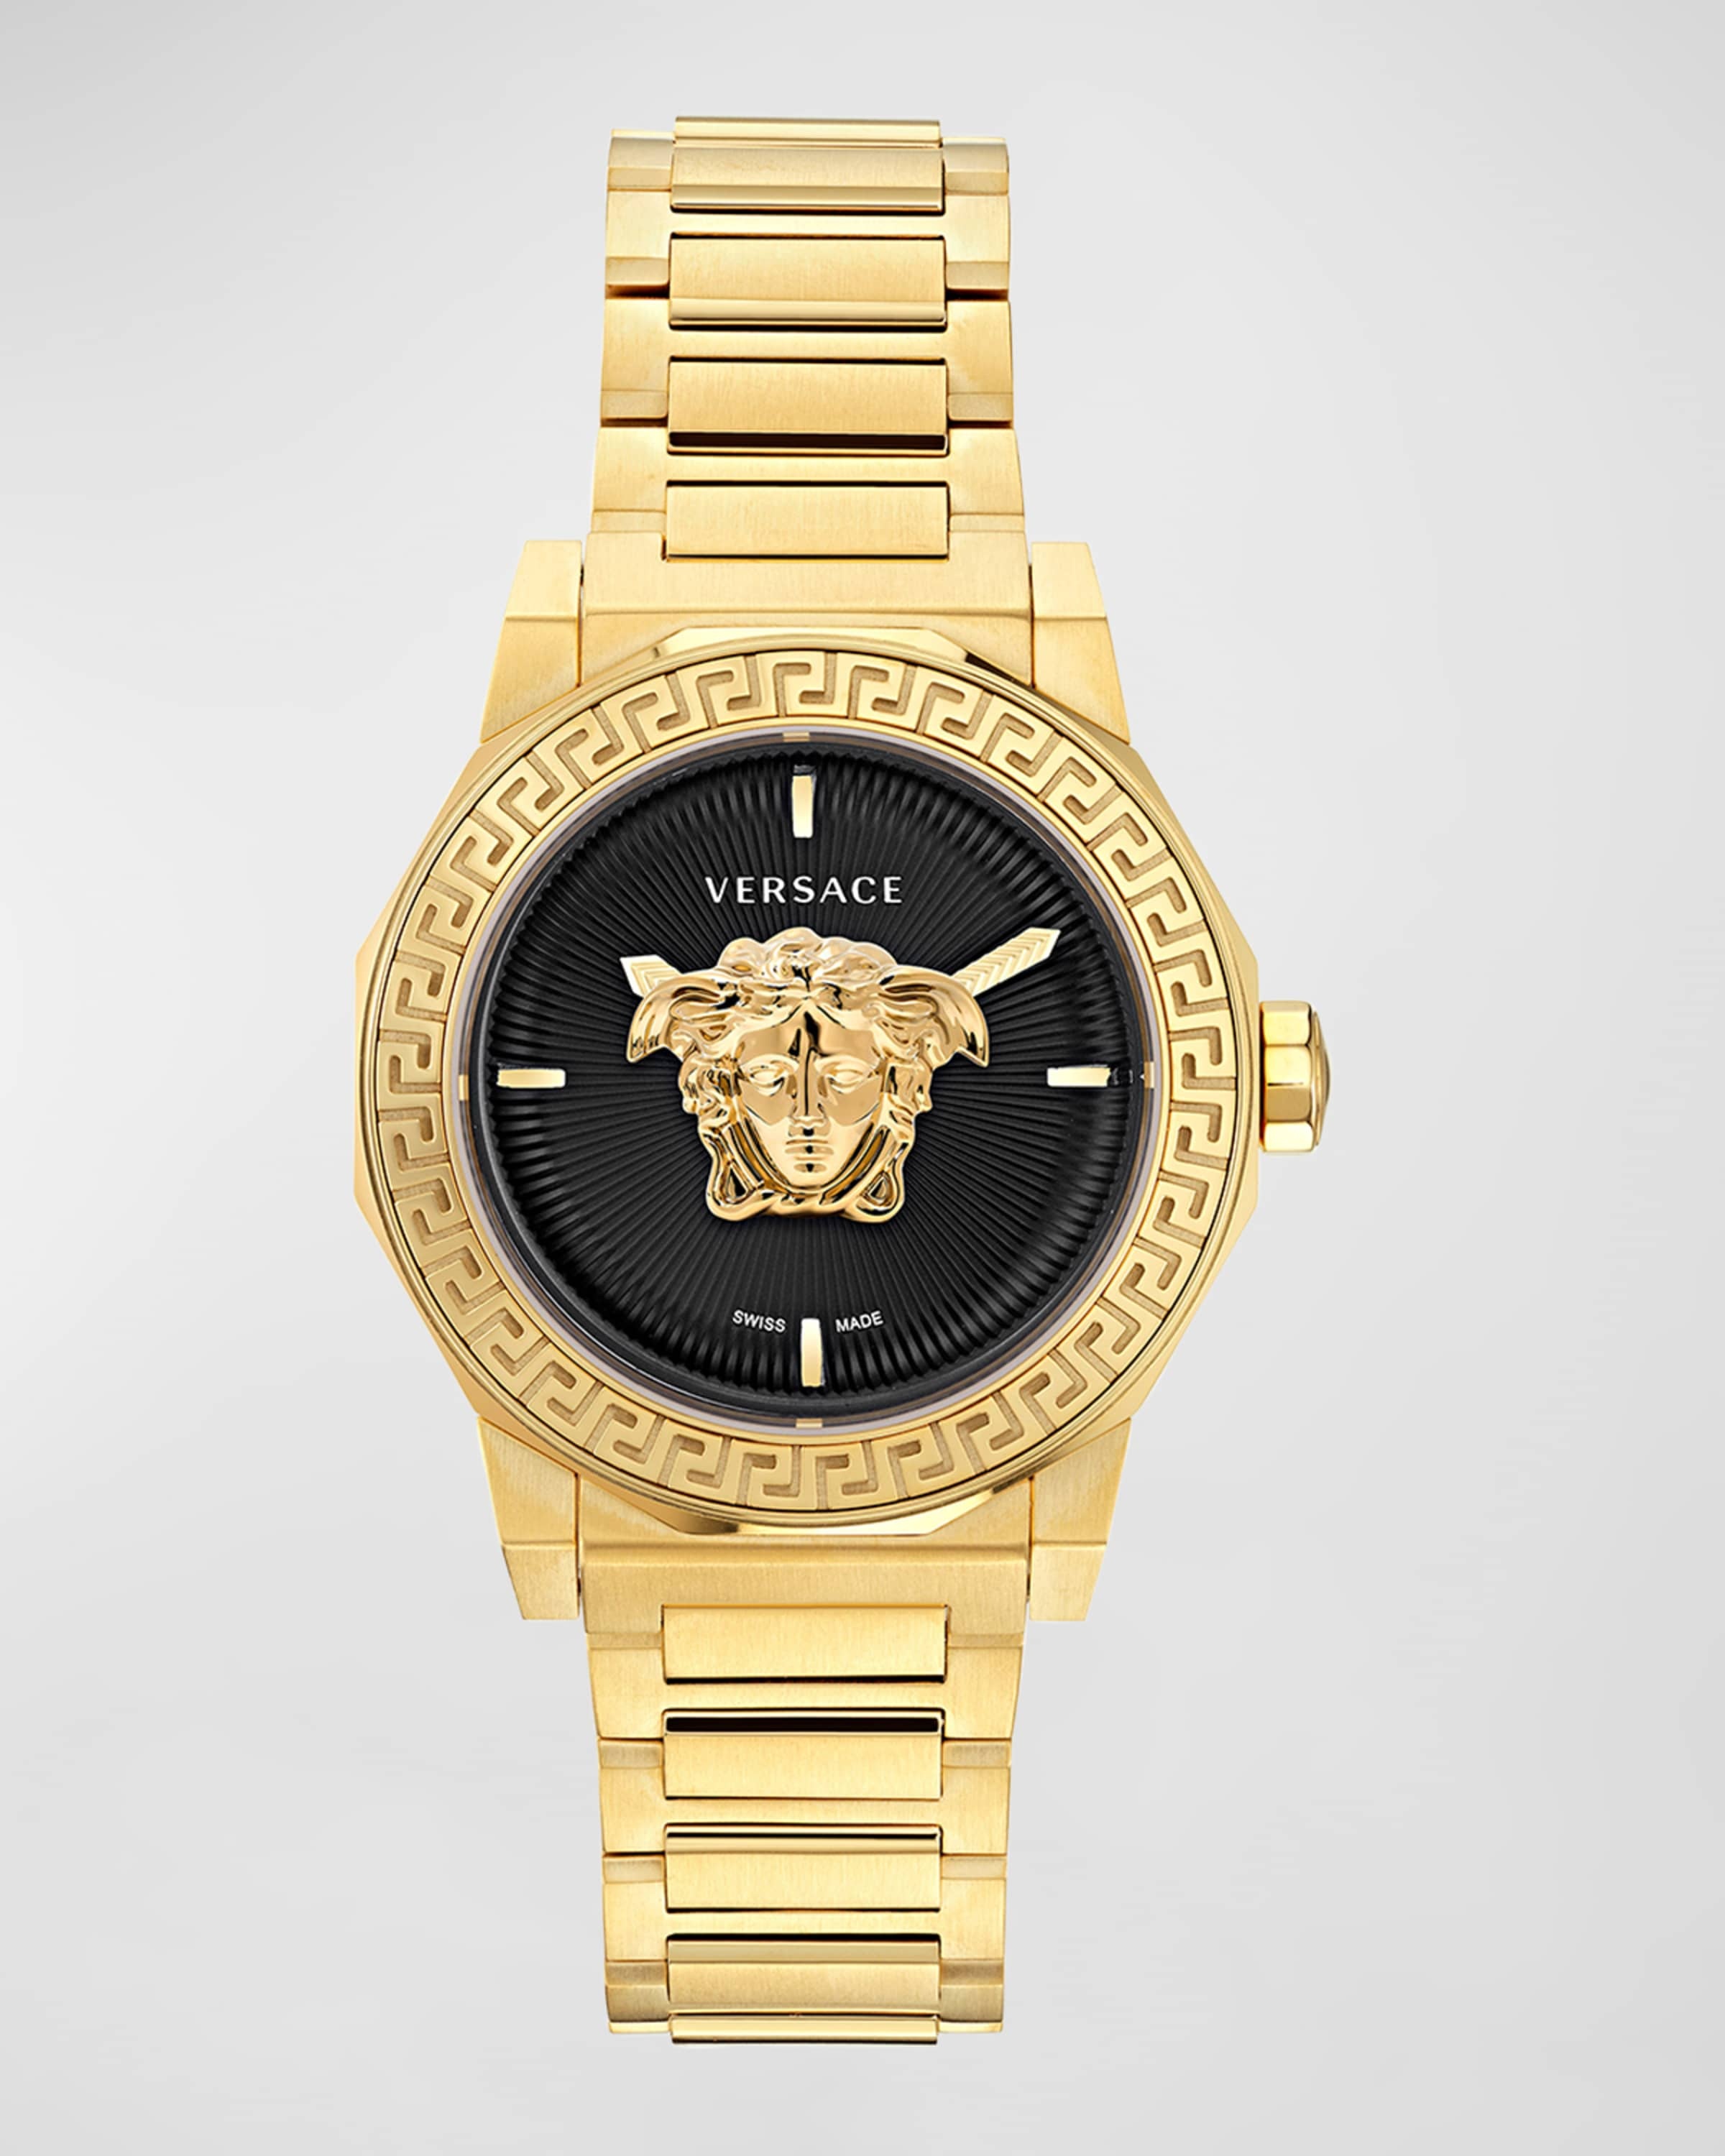 38mm Medusa Deco Watch with Bracelet Strap, Gold Plated - 1